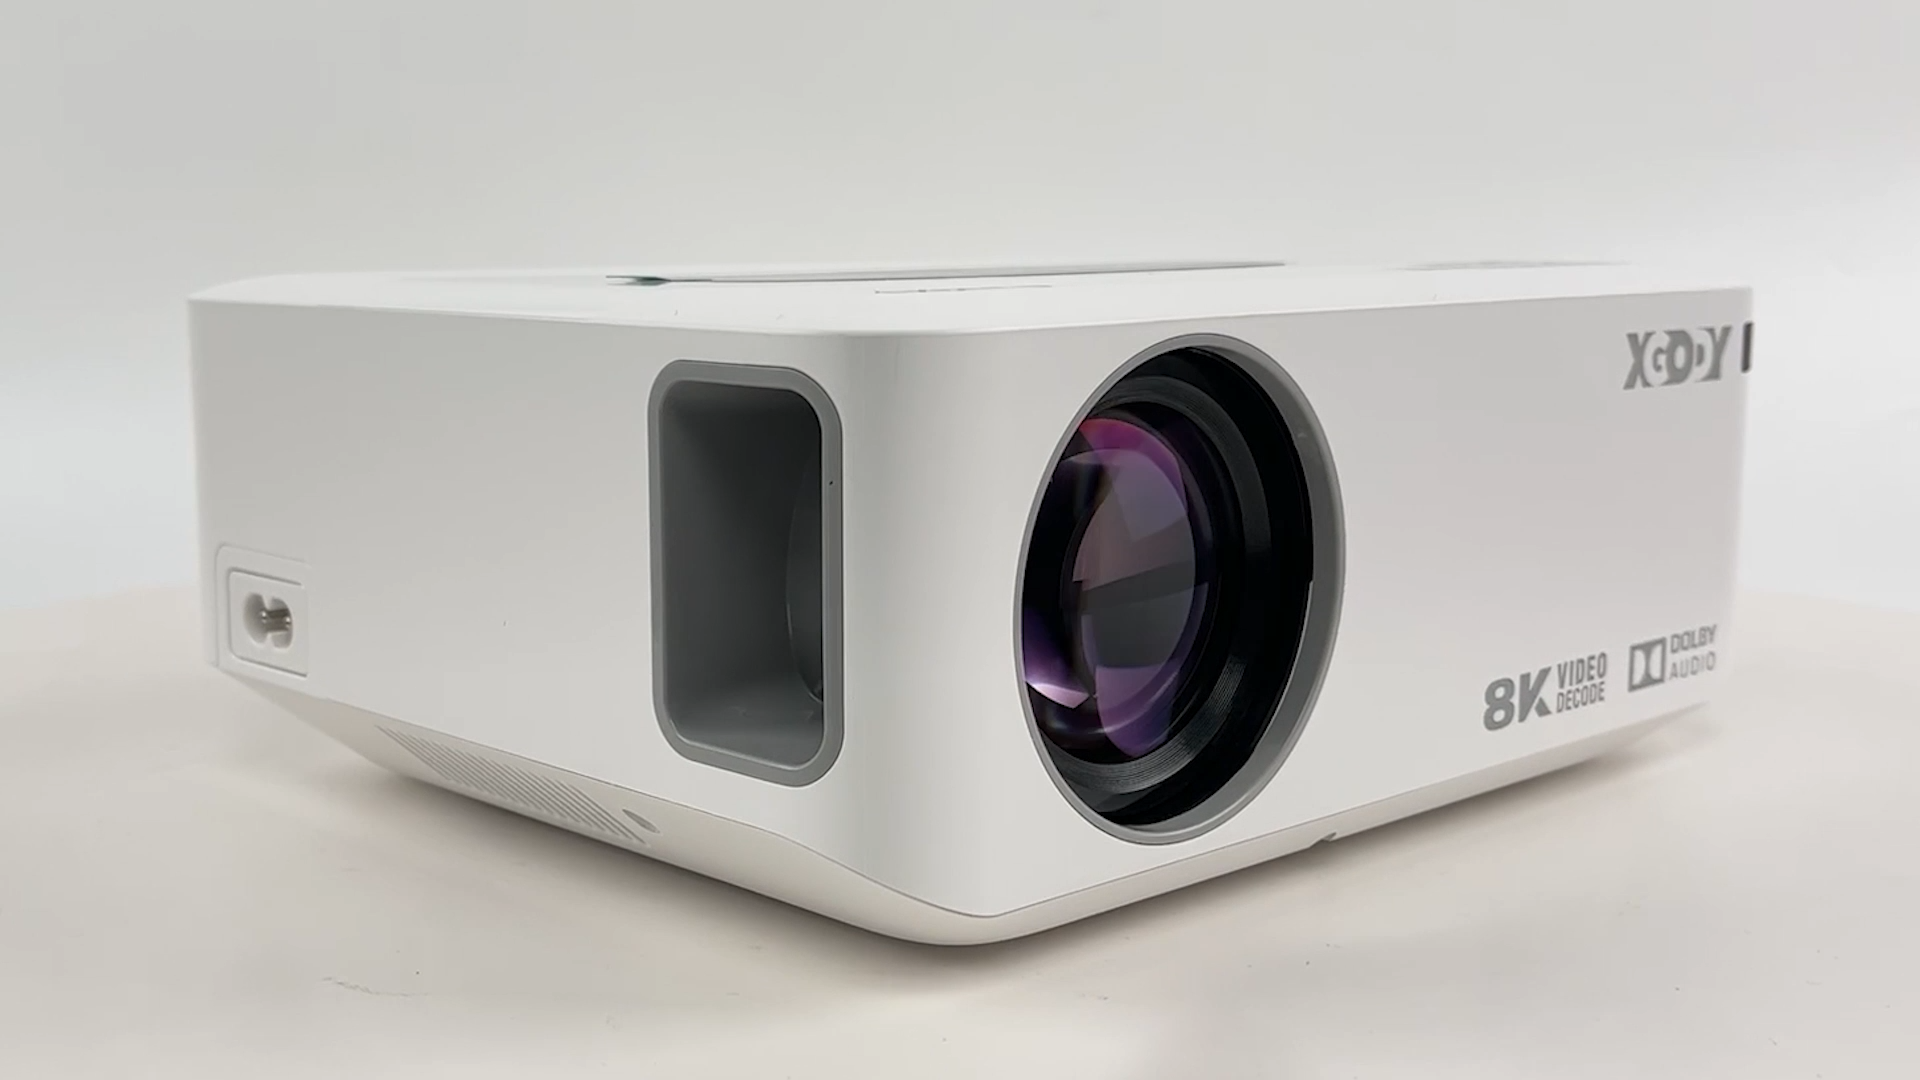 XGODY 4K Portable Smart Projector With Built-in Apps, Built-In TV Stic